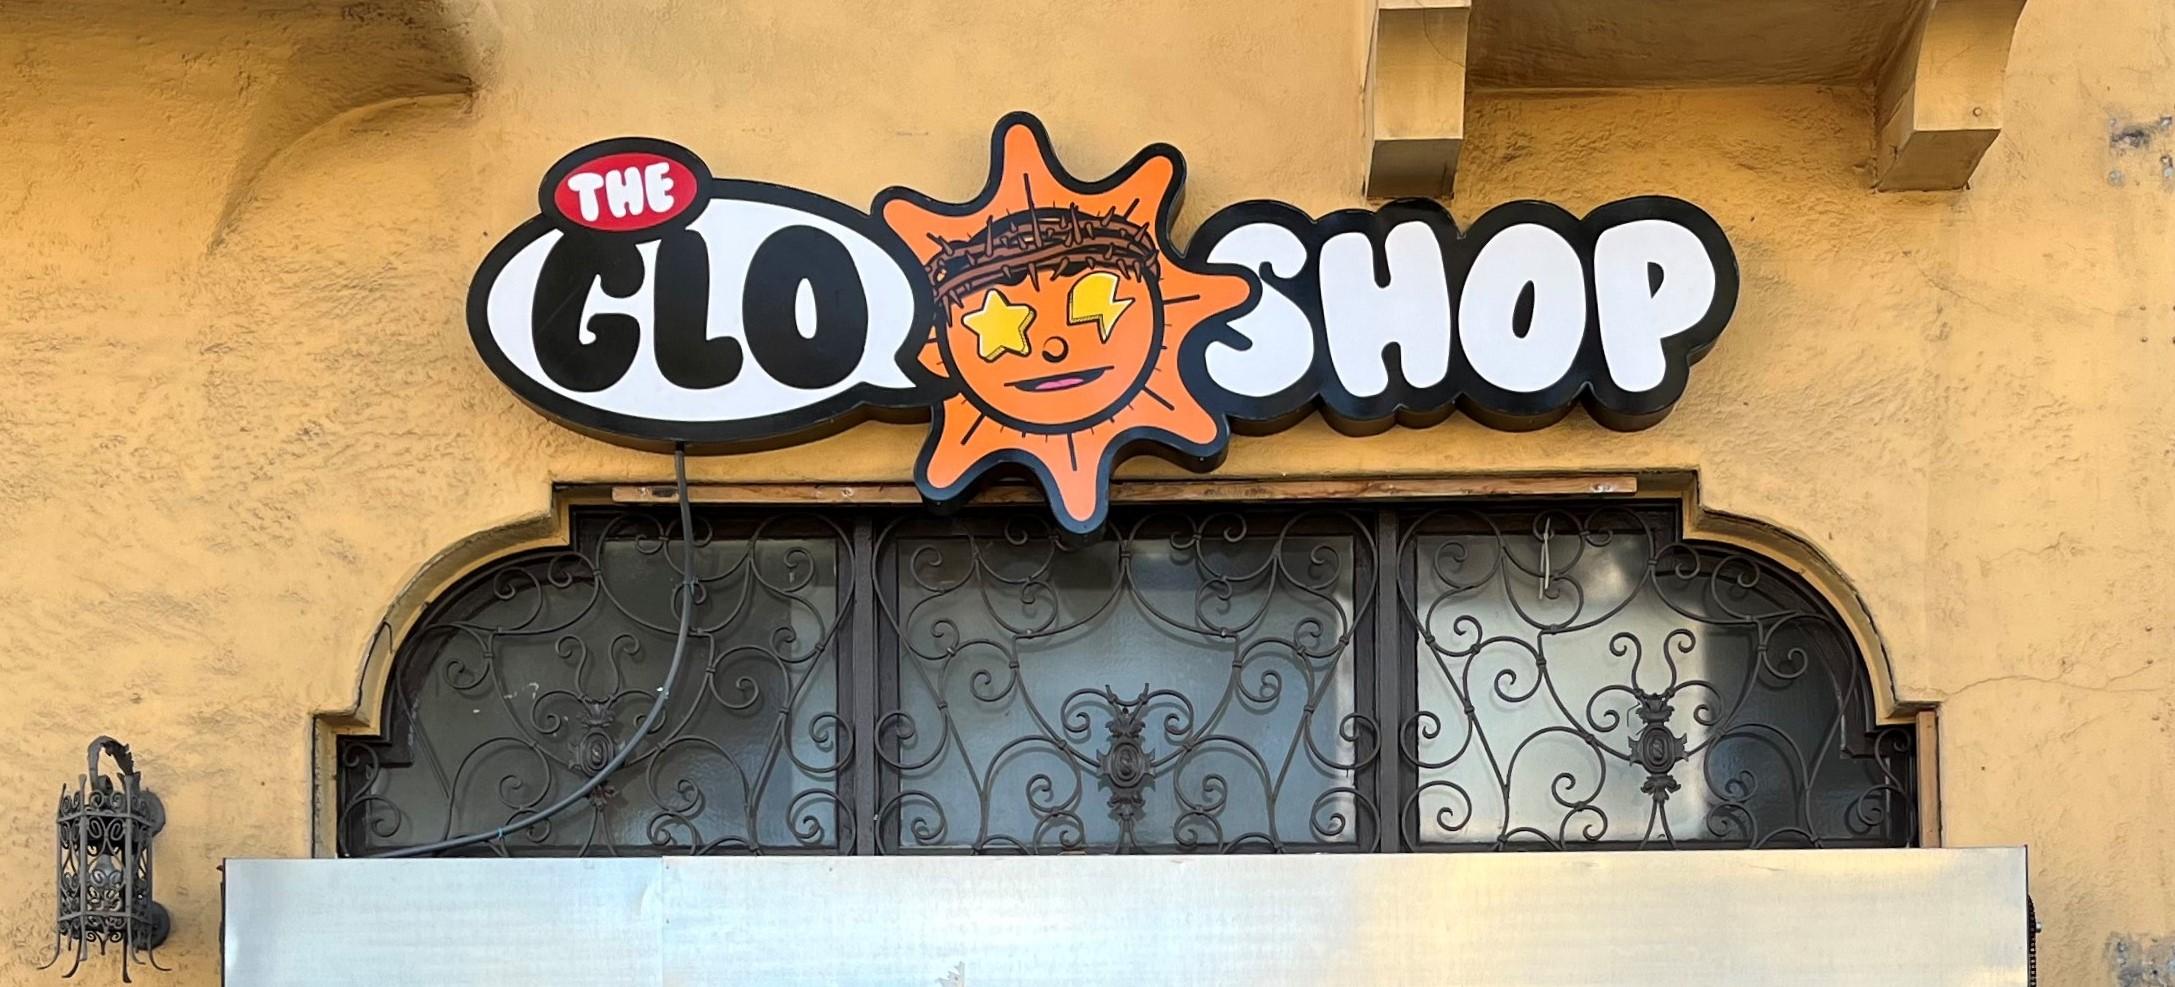 This contour cut light box storefront sign for The Glo Shop will definitely get eyes on their Melrose location and attract more customers.